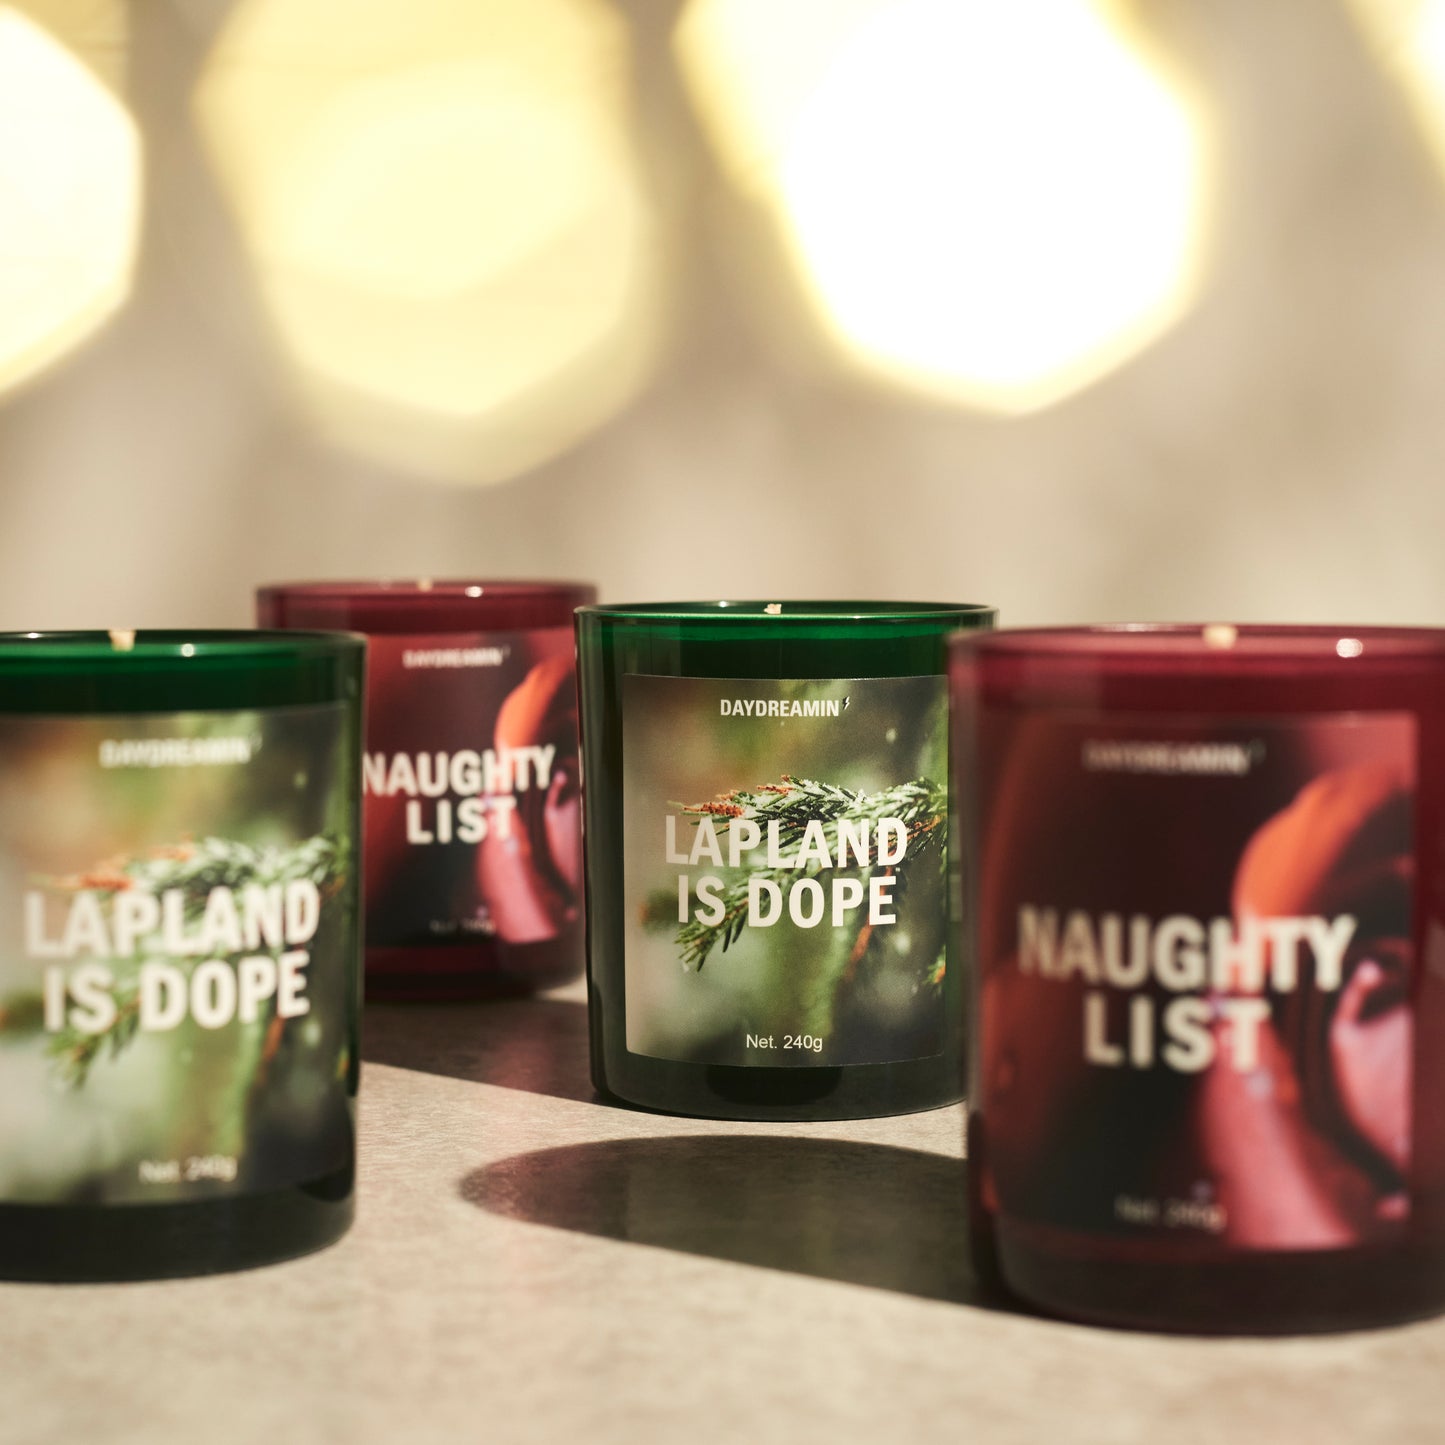 naughty list | scented candle